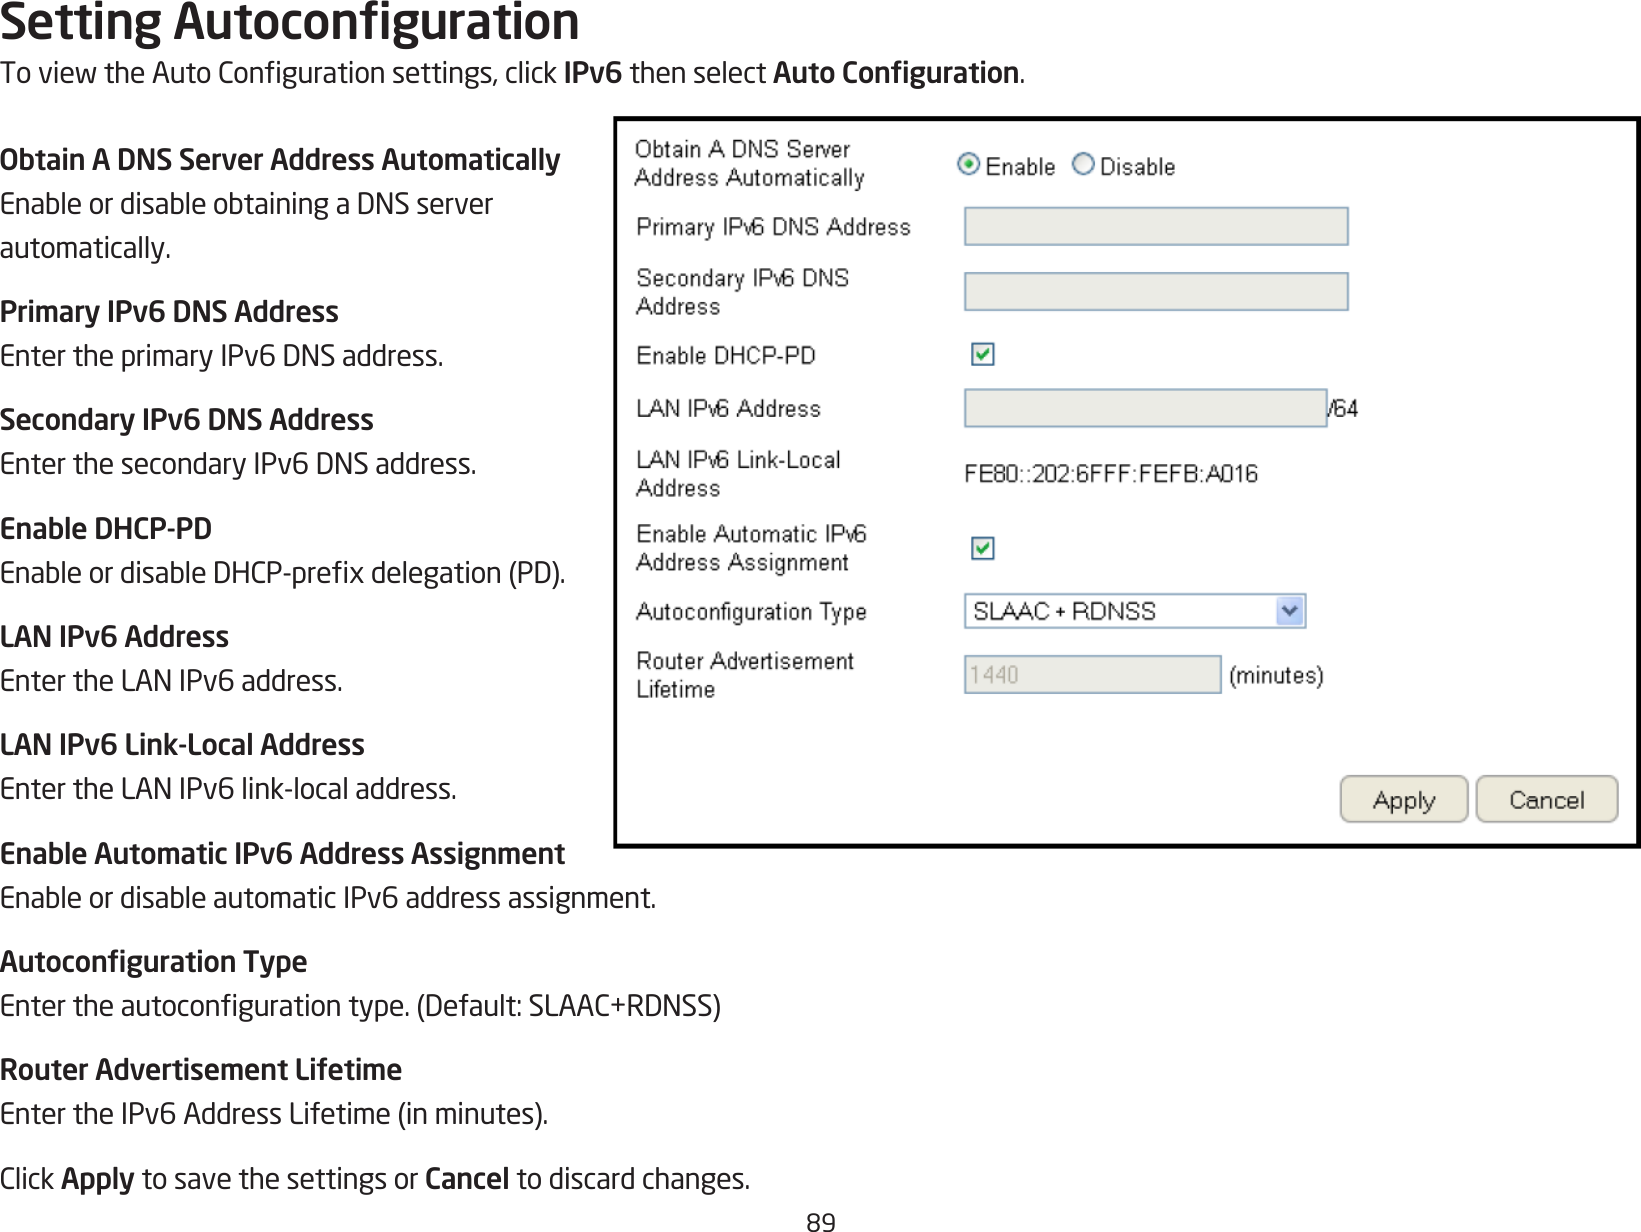 89Setting AutocongurationToviewtheAutoCongurationsettings,clickIPv6 then select Auto Conguration.Obtain A DNS Server Address AutomaticallyEnableordisableobtainingaDNSserverautomatically.Primary IPv6 DNS AddressEntertheprimaryIPv6DNSaddress.Secondary IPv6 DNS AddressEnterthesecondaryIPv6DNSaddress.Enable DHCP-PDEnableordisableDHCP-prexdelegation(PD).LAN IPv6 AddressEntertheLANIPv6address.LAN IPv6 Link-Local AddressEntertheLANIPv6link-localaddress.Enable Automatic IPv6 Address AssignmentEnableordisableautomaticIPv6addressassignment.Autoconguration TypeEntertheautocongurationtype.(Default:SLAAC+RDNSS)Router Advertisement LifetimeEntertheIPv6AddressLifetime(inminutes).ClickApply to save the settings or Cancel to discard changes.